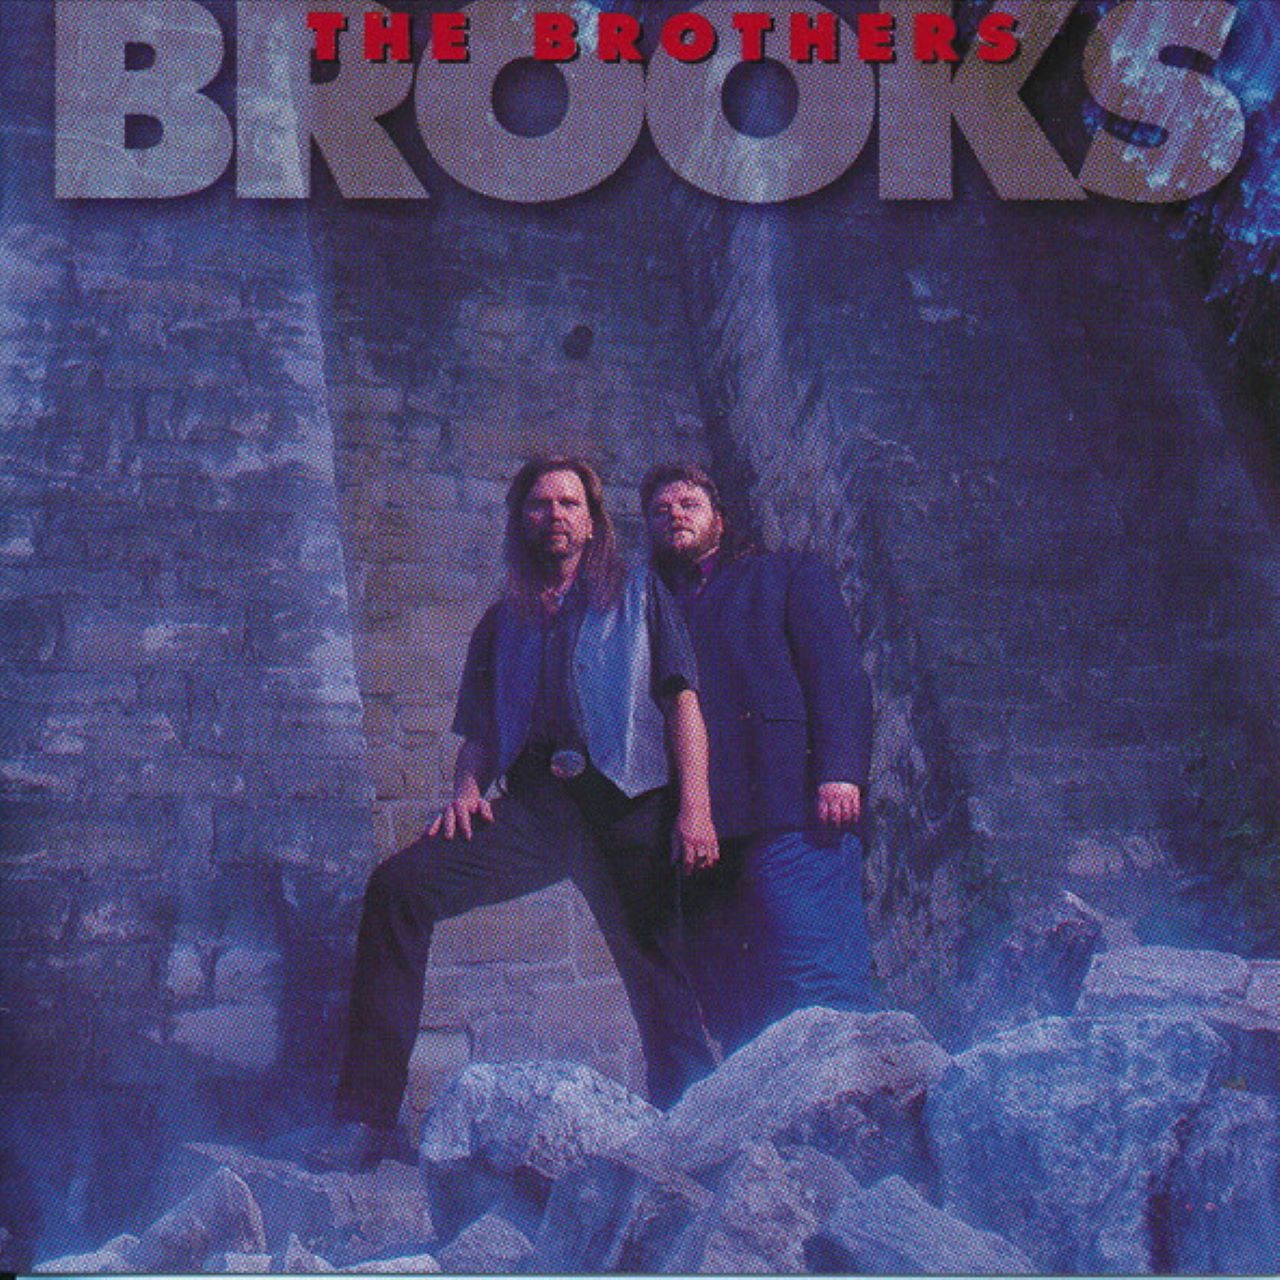 Brothers Brooks - The Brothers Brooks cover album